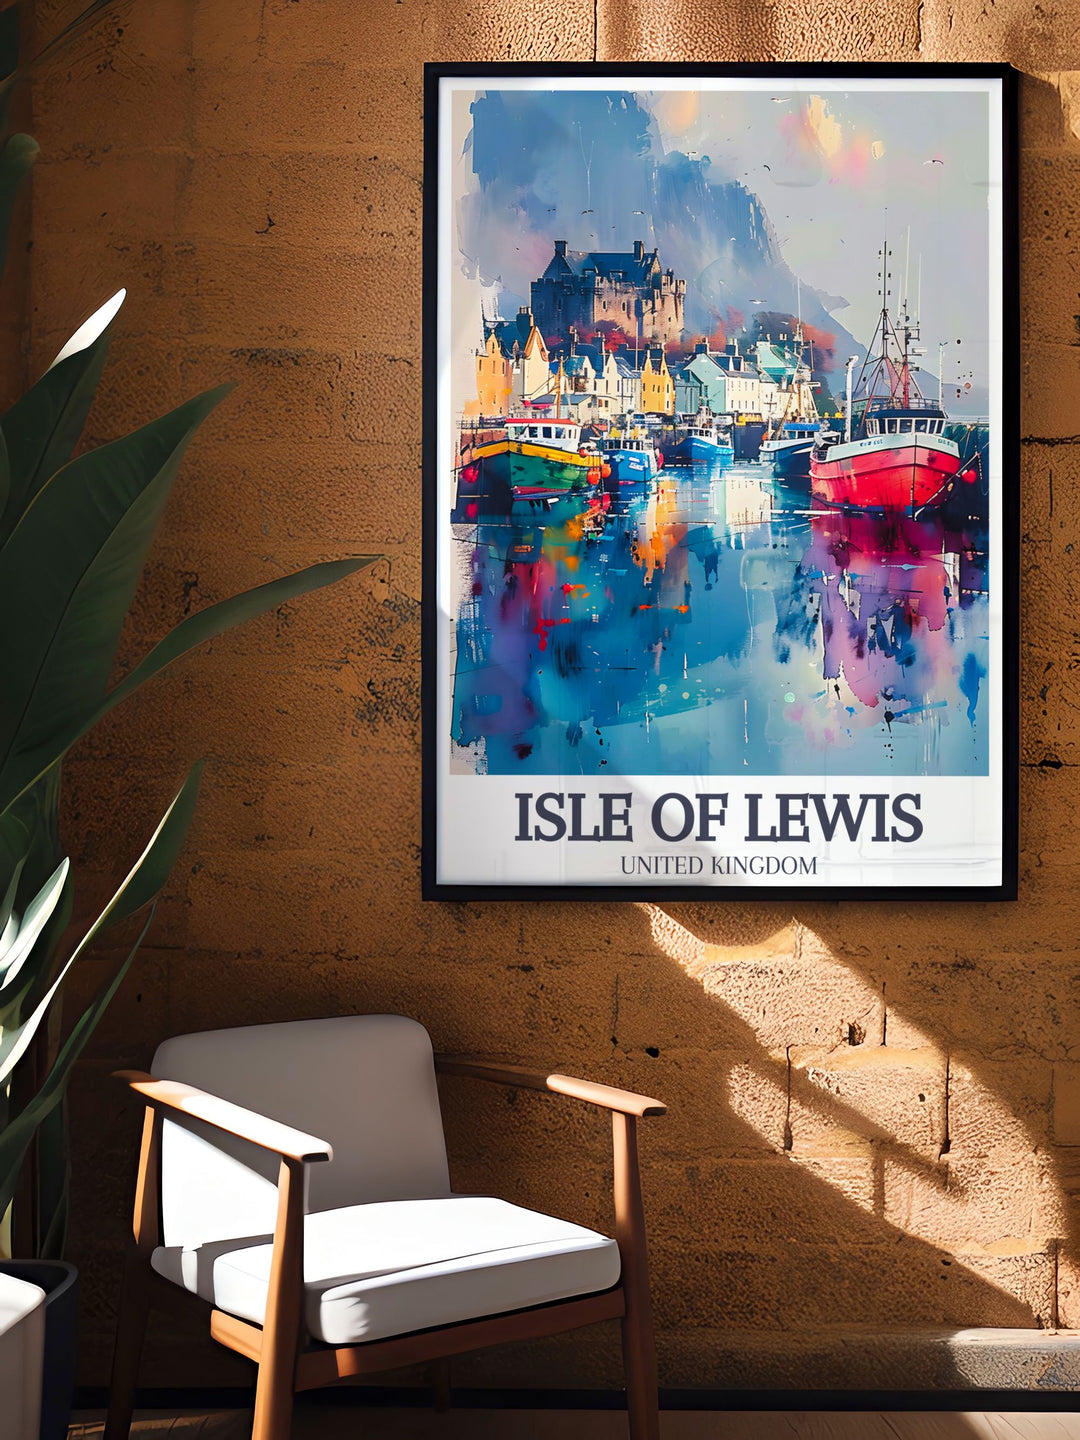 Custom print of the Isle of Lewis, capturing its breathtaking scenery and outdoor adventure opportunities, ideal for creating a nature inspired decor.